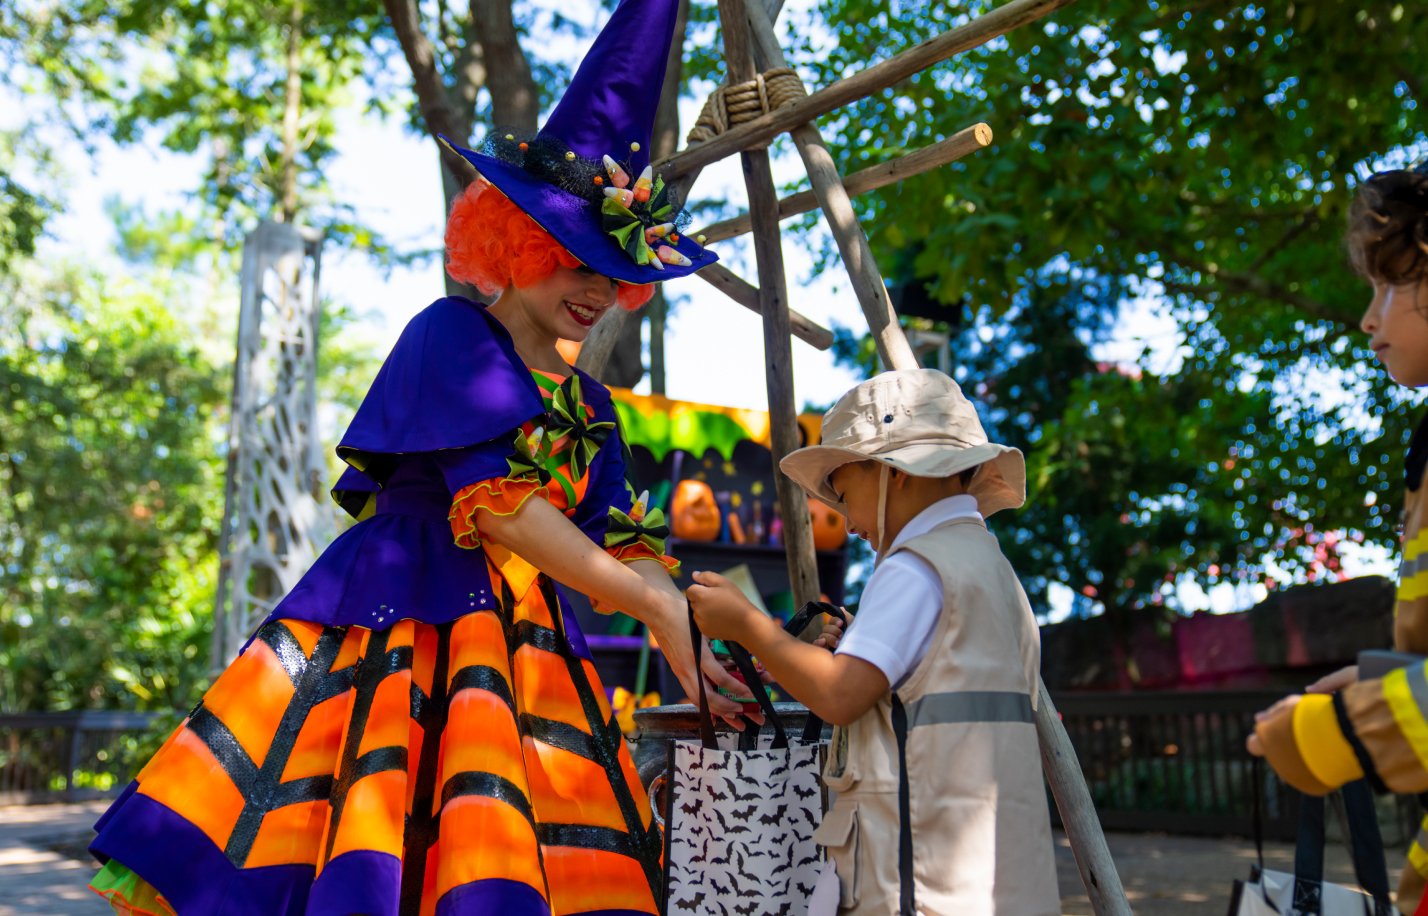 Trick-or-treating at Busch Gardens Tampa Bay Spooktacular event.